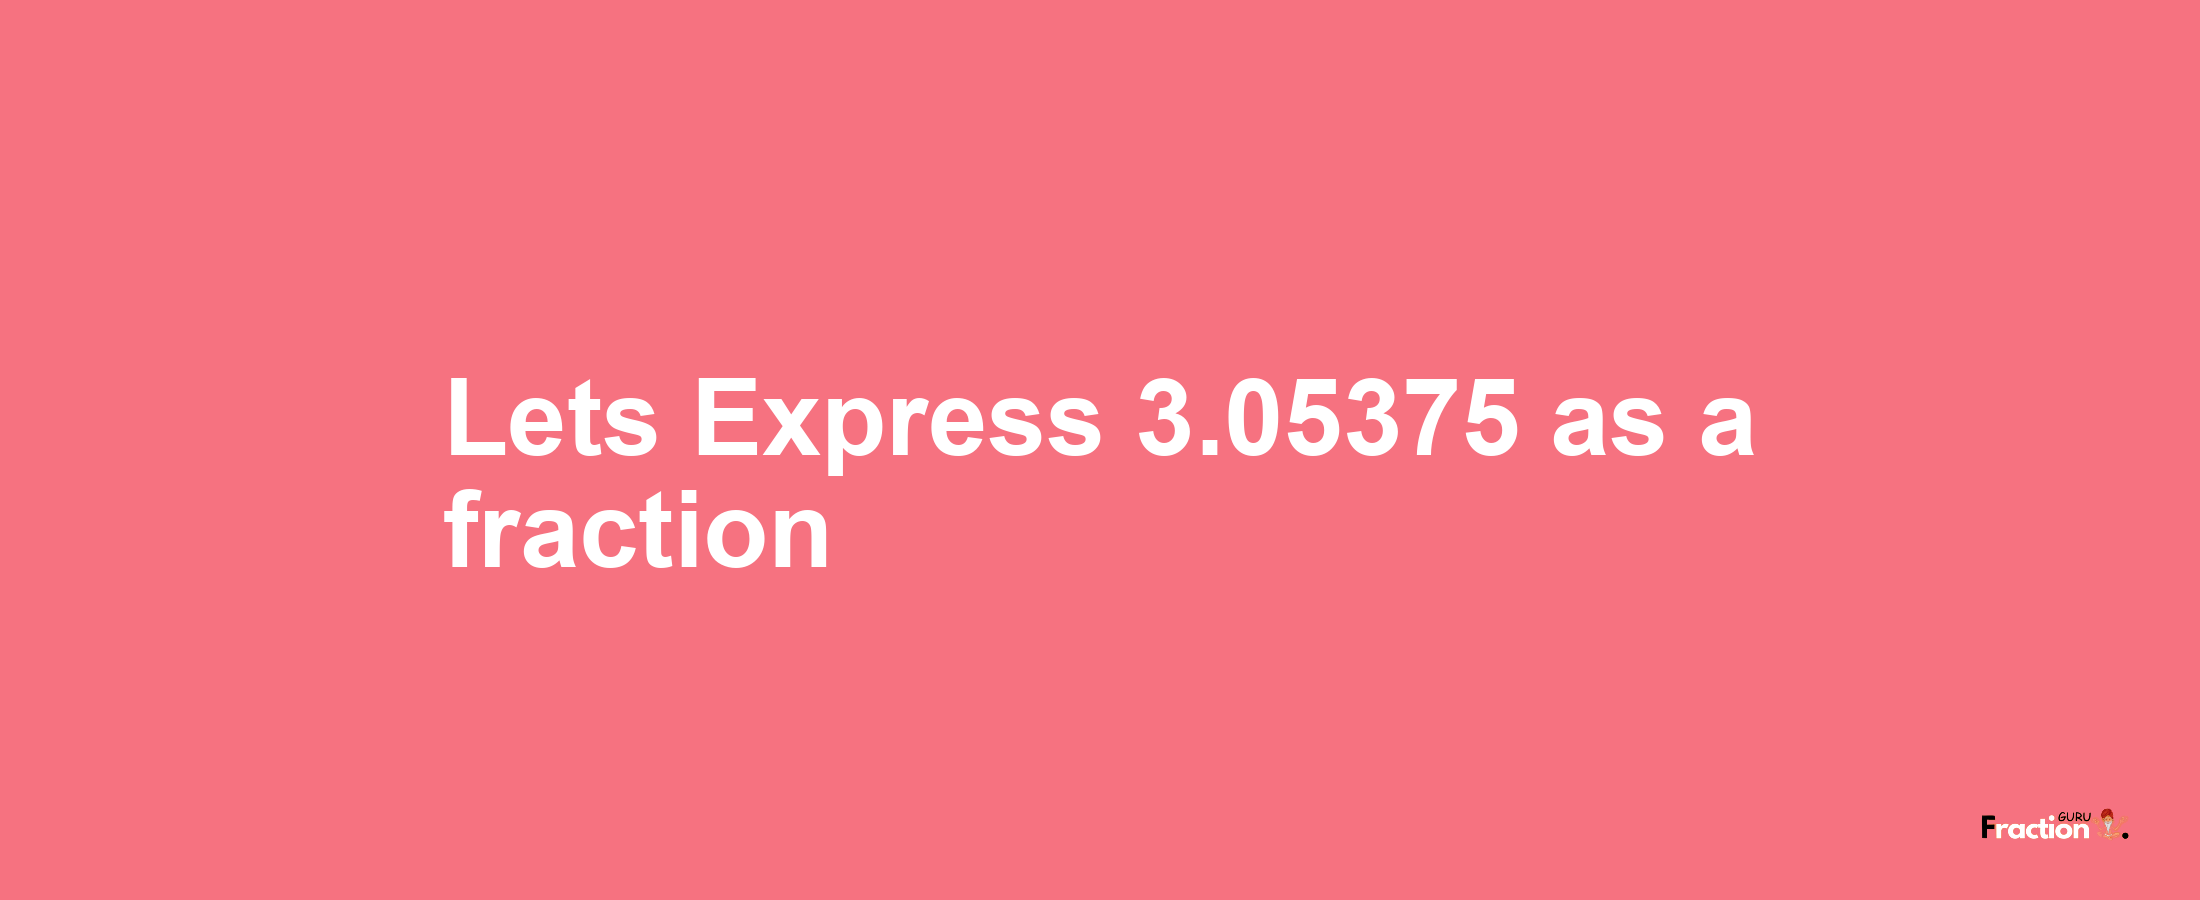 Lets Express 3.05375 as afraction